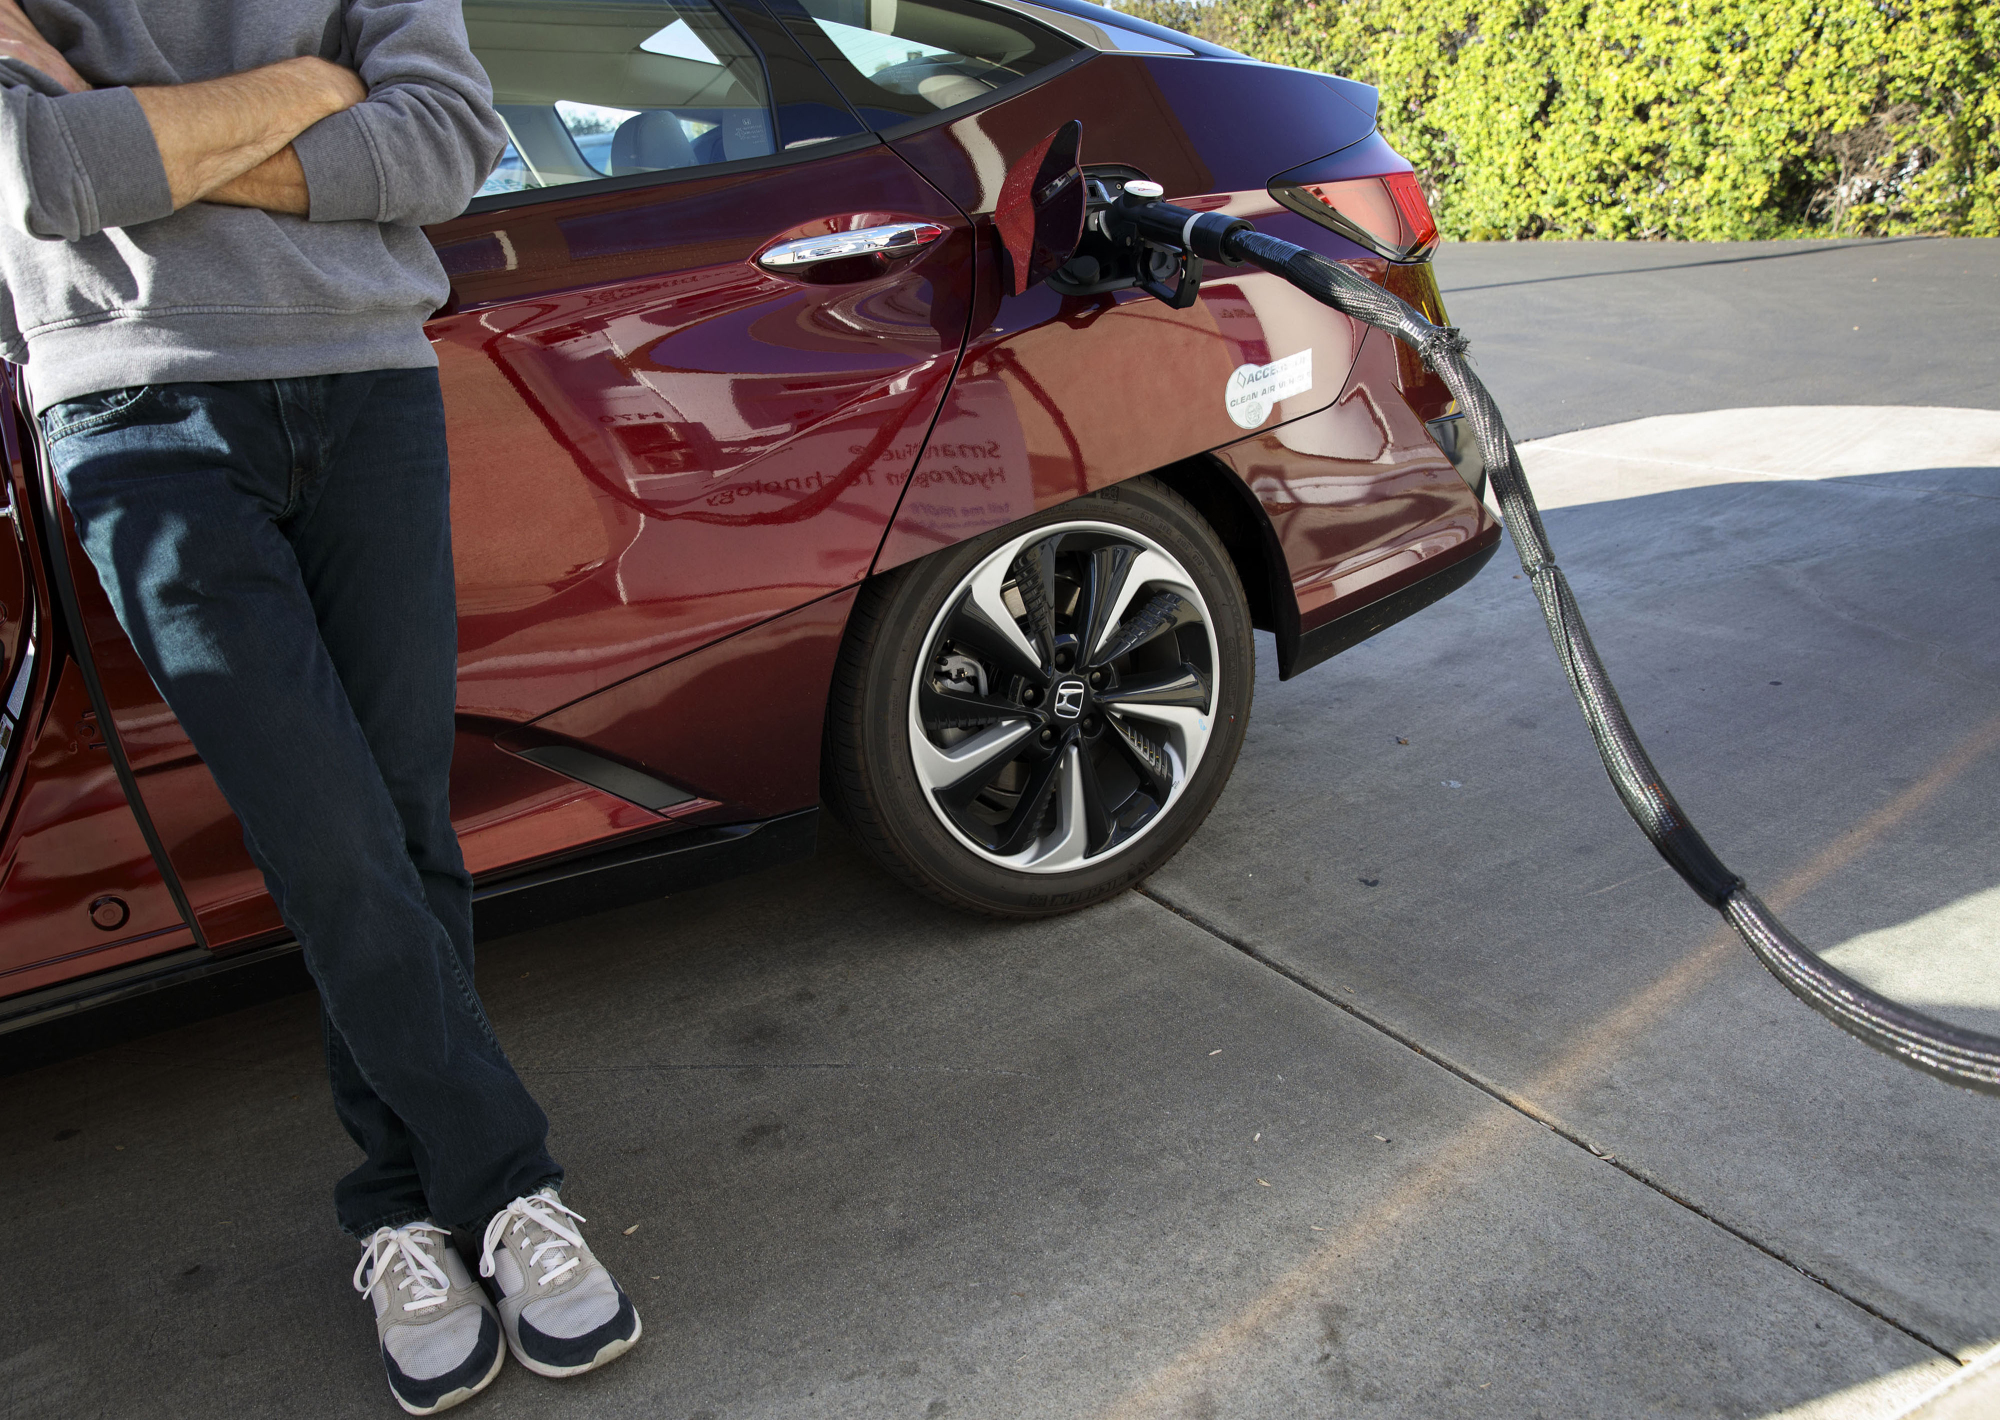 A customer refuels a Honda Motor Co. Clarity hydrogen fuel-cell vehicle at the UC Irvine Hydrogen Fueling Station, operated by the National Fuel Cell Research Center (NFCRC), in Irvine, California, in February. | BLOOMBERG